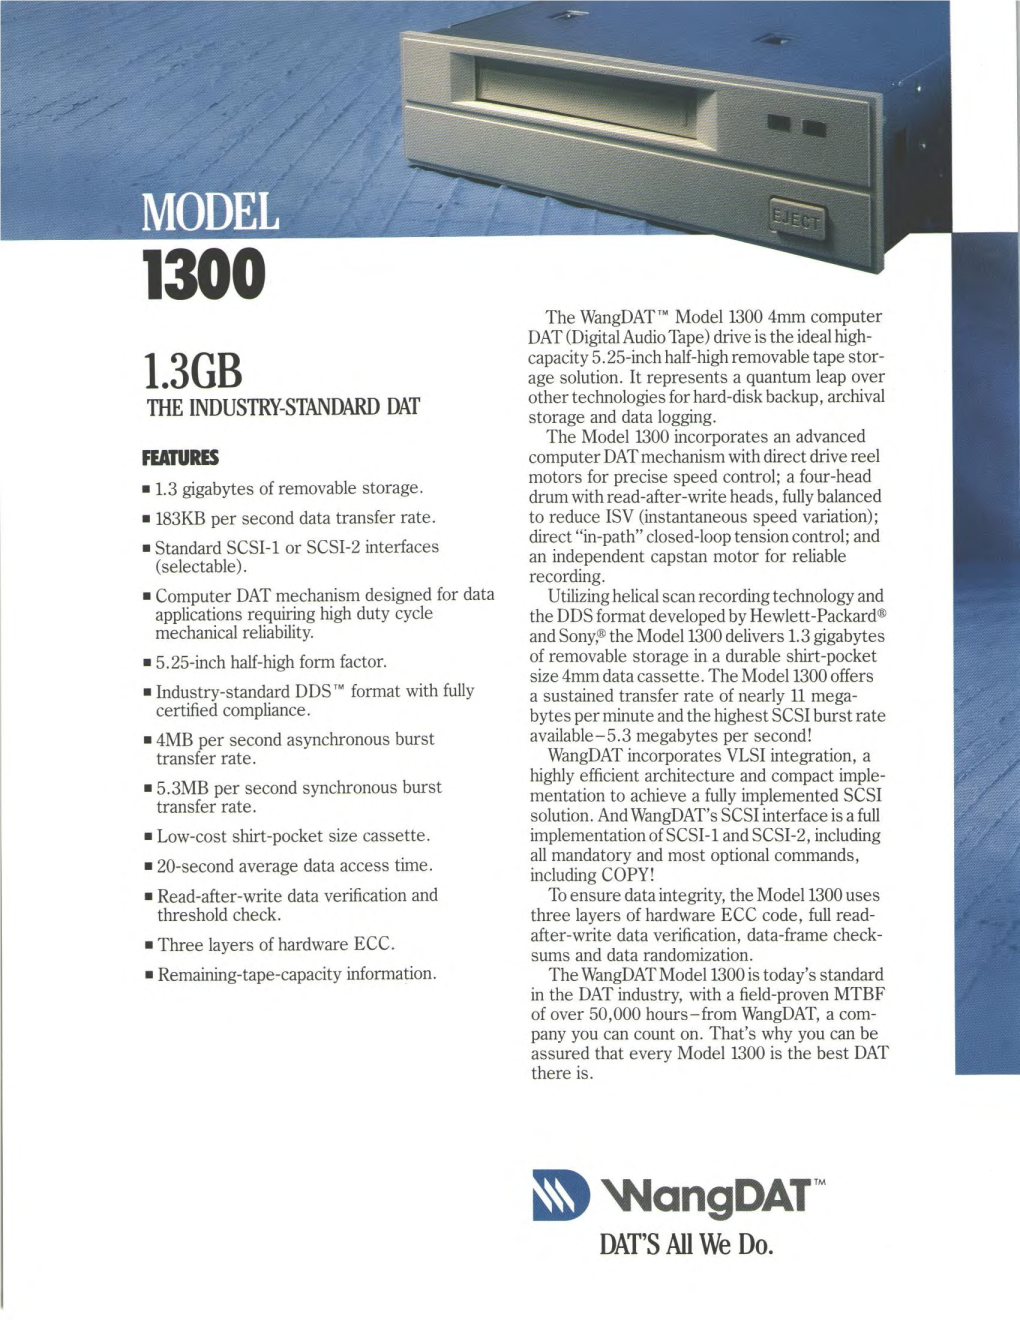 Wangdat" Model 1300 4Mm Computer DAT (Digital Audio Tape) Drive Is the Ideal High- Capacity 5.25-Inch Half-High Removable Tape Stor- Age Solution